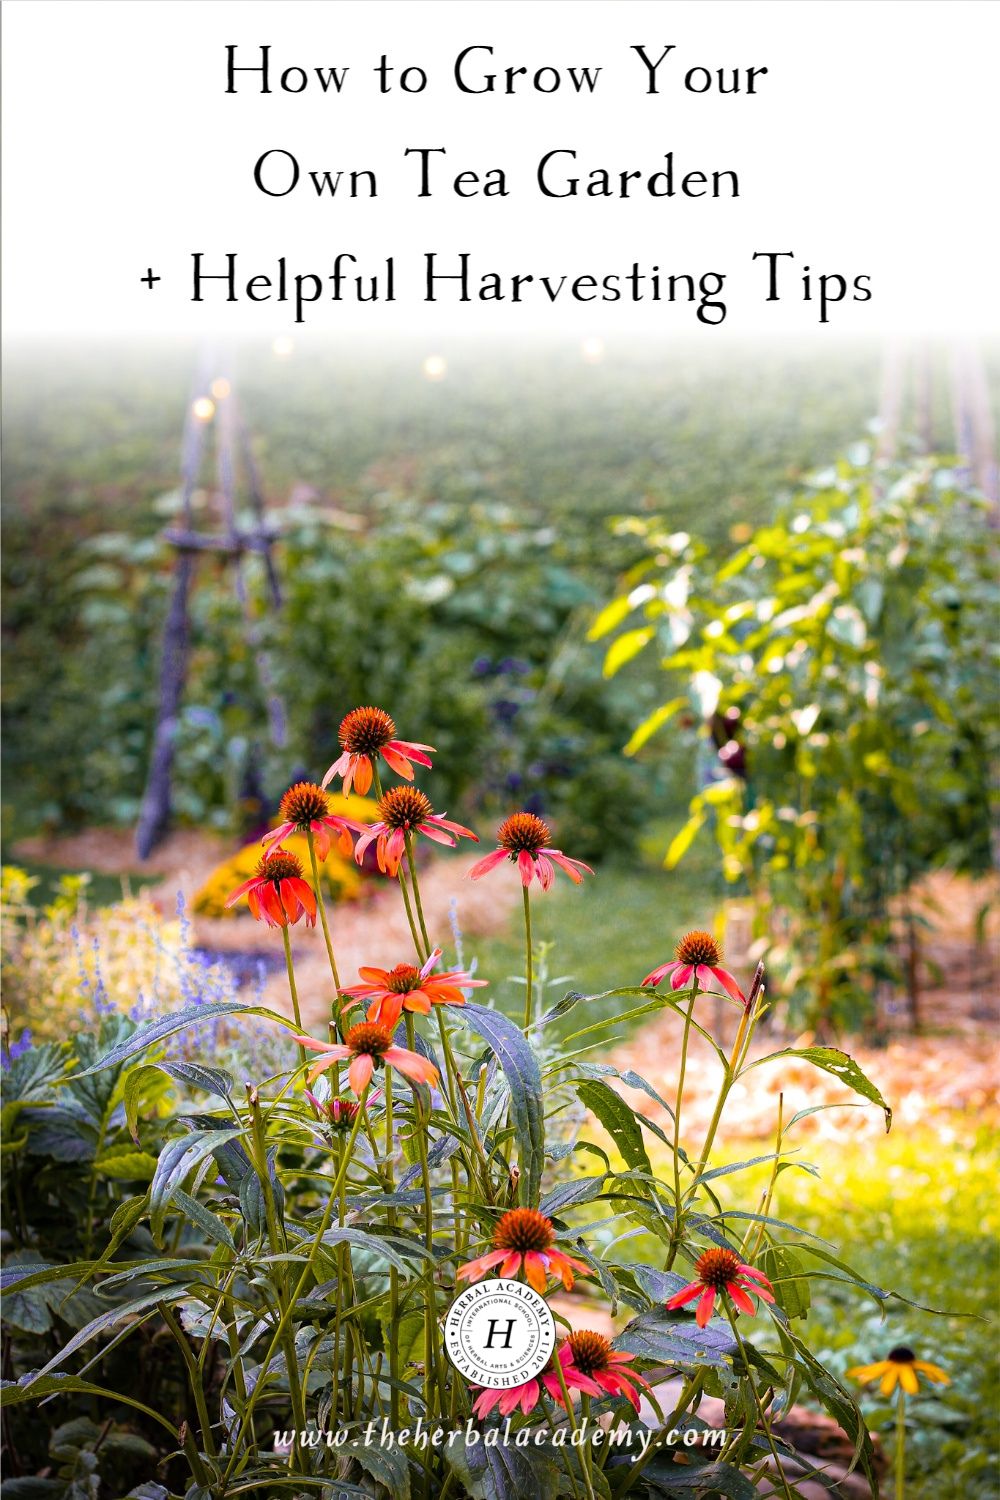 How to Grow Your Own Tea Garden + Helpful Harvesting Tips | Herbal Academy | Whether you’re buying tea or growing your own tea garden, making tea is a time of thoughtfulness where you are actively nourishing your body.